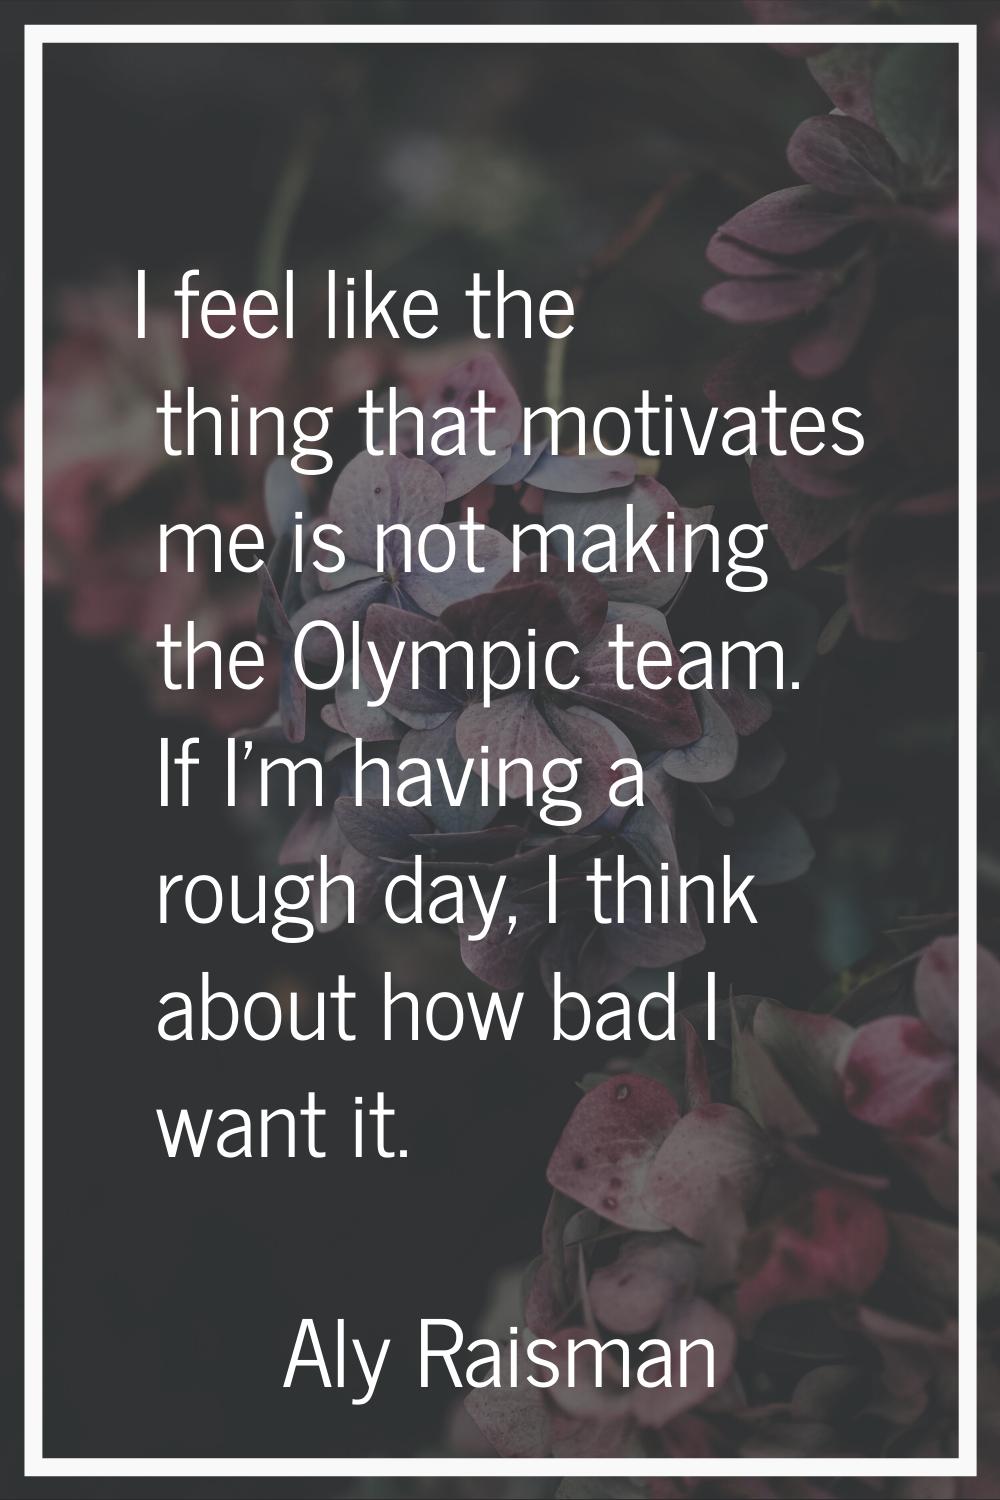 I feel like the thing that motivates me is not making the Olympic team. If I'm having a rough day, 